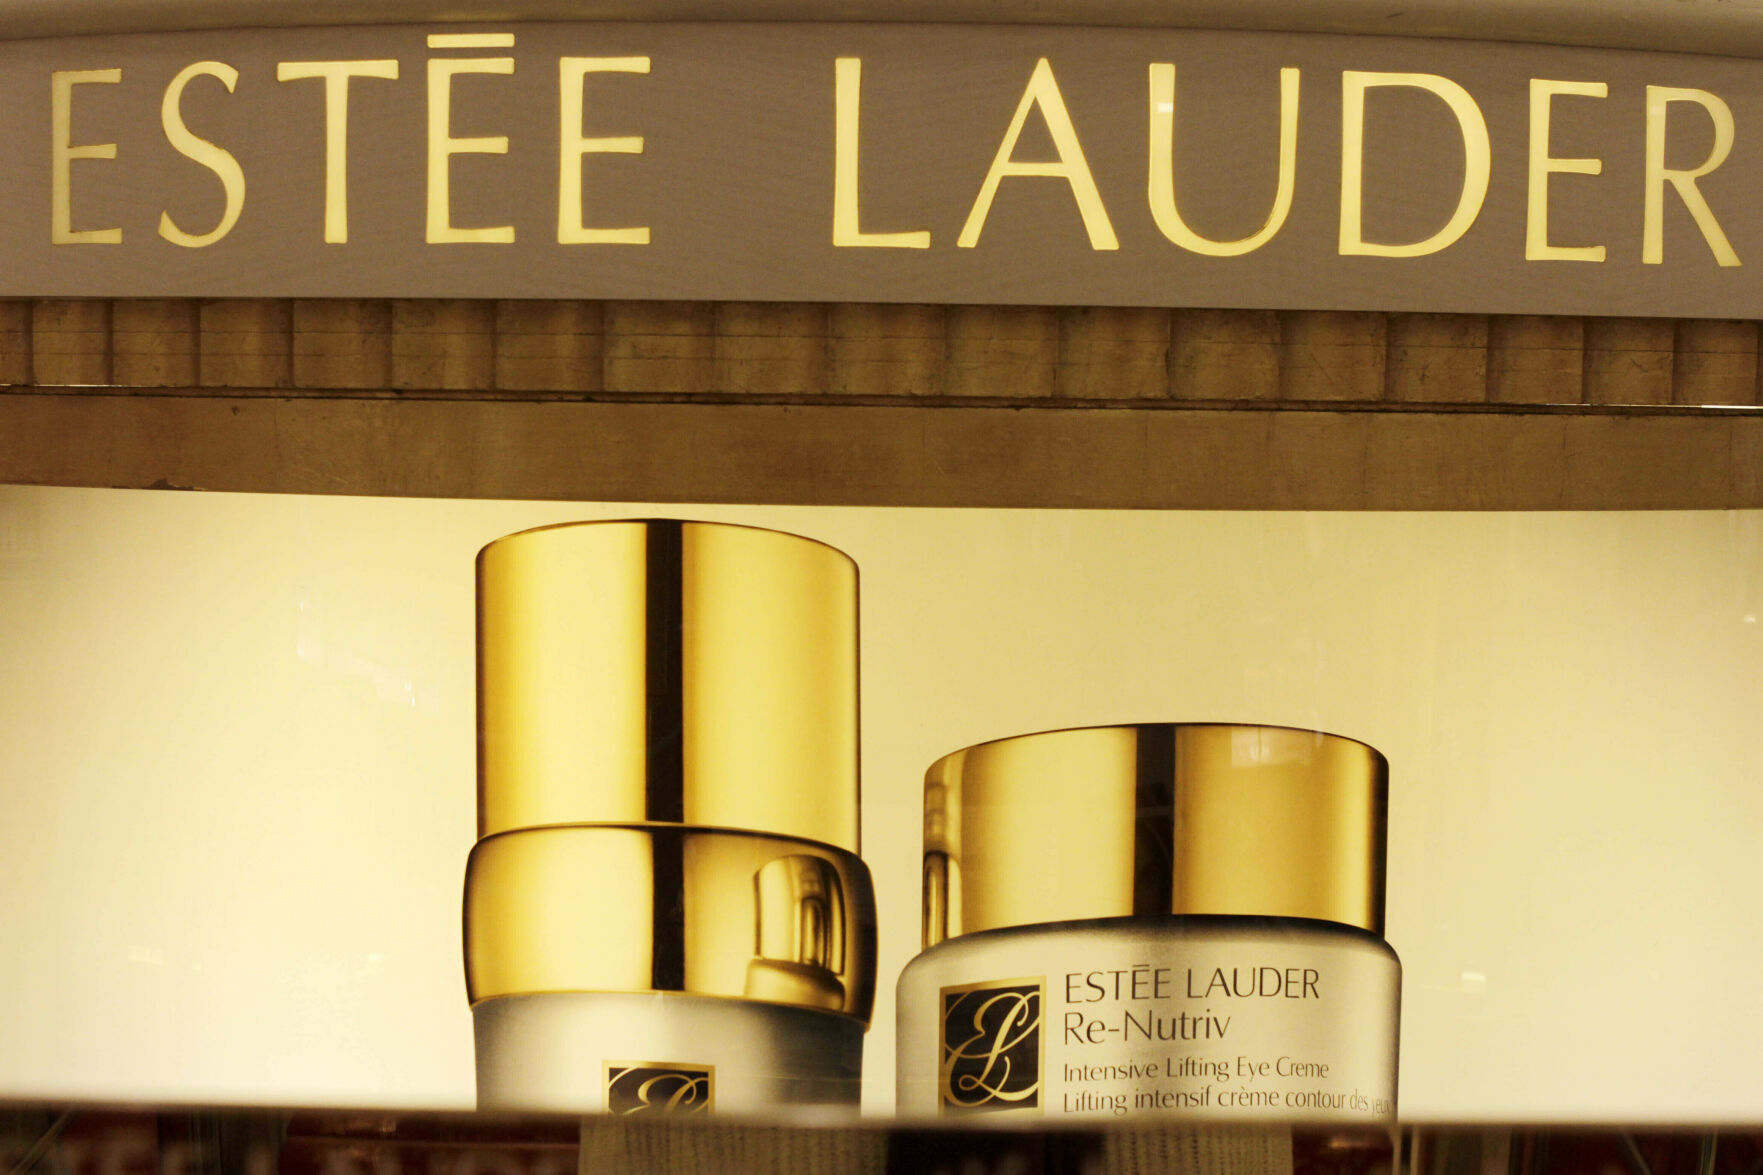 <p>FILE - In this Nov. 2, 2011 file photo, Estee Lauder products are displayed at a department store in S. Portland, Maine. Estee Lauder announced it’s cutting 3% to 5% of its global workforce as it aims to increase profits and become more nimble in a still challenging international environment. The company’s plans, announced Monday, Feb. 5, 2024, came as it reported a drop in profits and sales for the fourth quarter, dragged down by sluggish sales in China. (AP Photo/Pat Wellenbach, File)</p>   PHOTO CREDIT: Pat Wellenbach